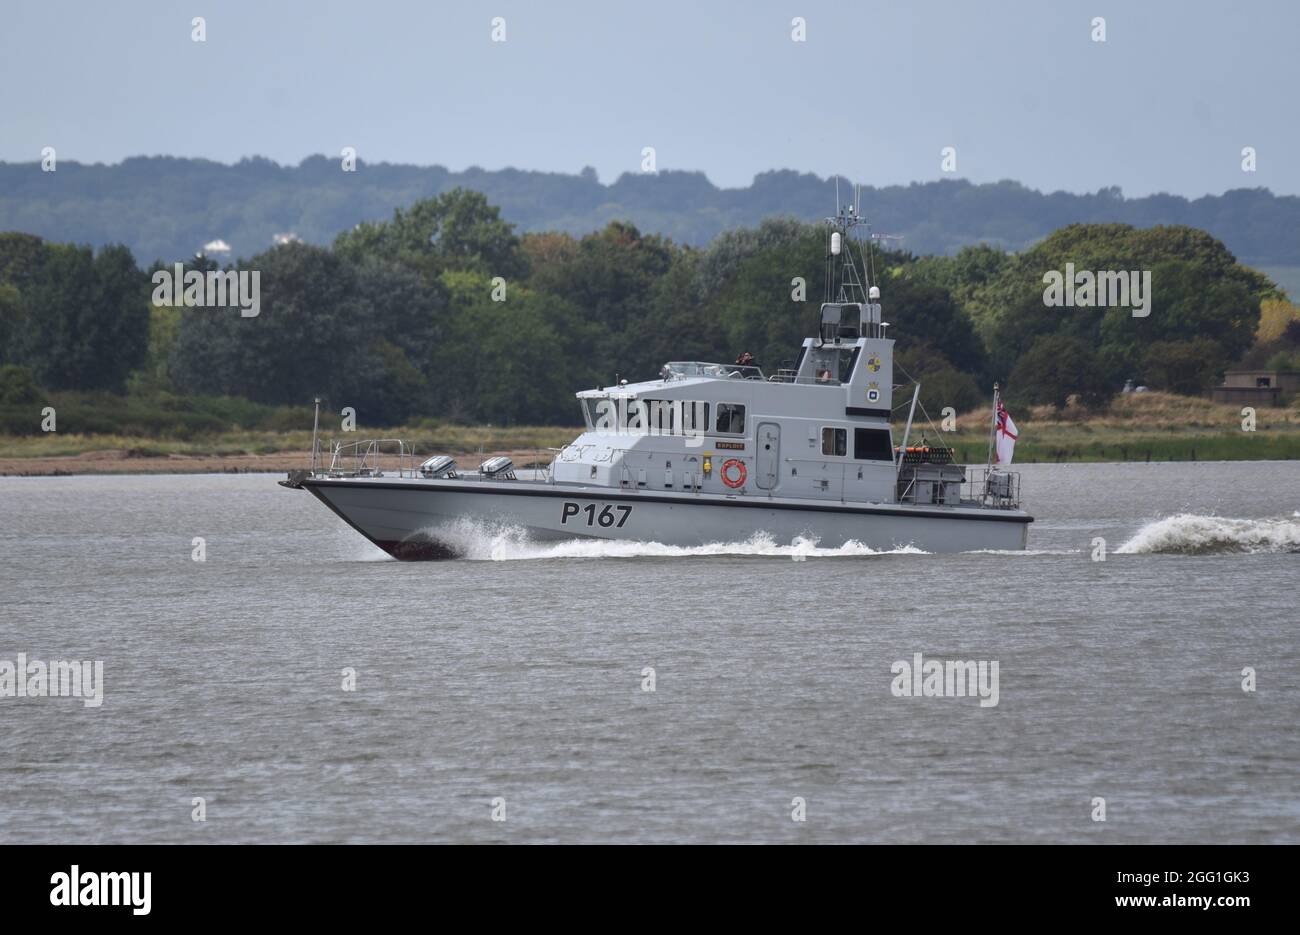 27/08/2021. Gravesend. HMS Exploit (P167) a Royal Navy Archer-Class patrol Boat setting the pace in Gravesend Reach. Stock Photo